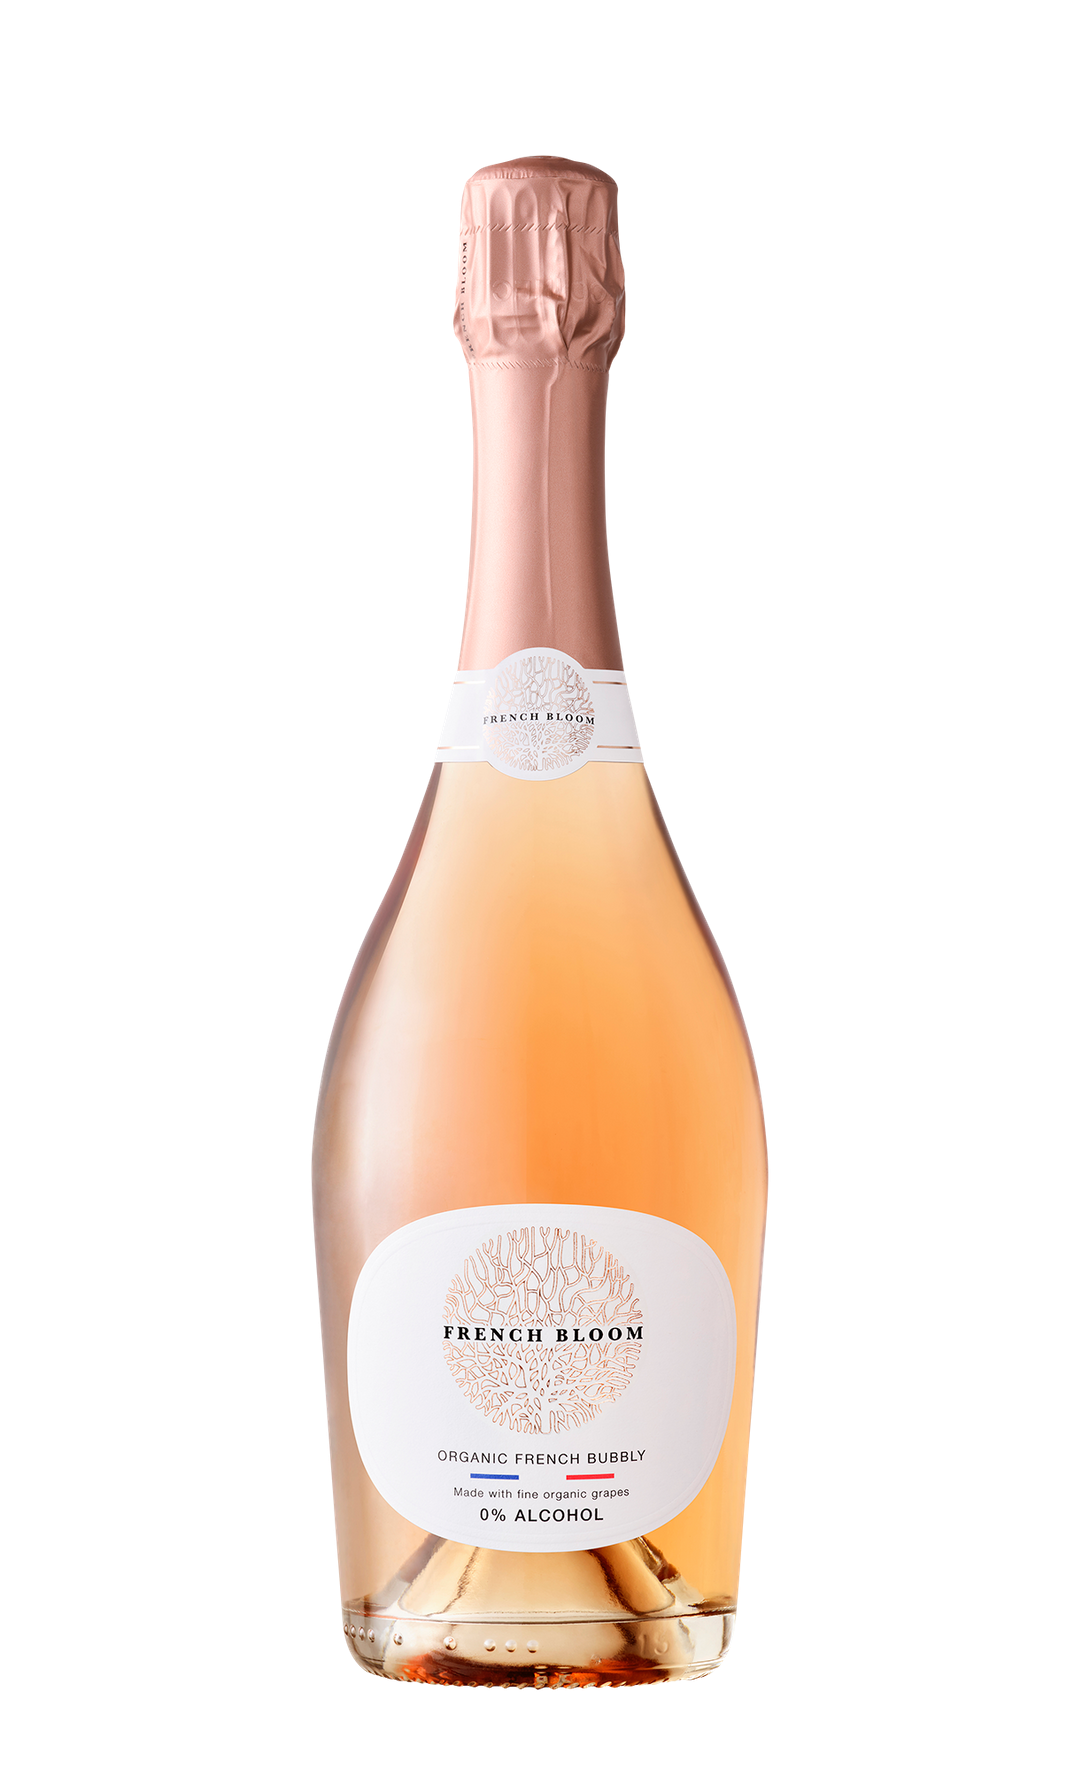 Alcohol-free sparkling rose wine by French Bloom